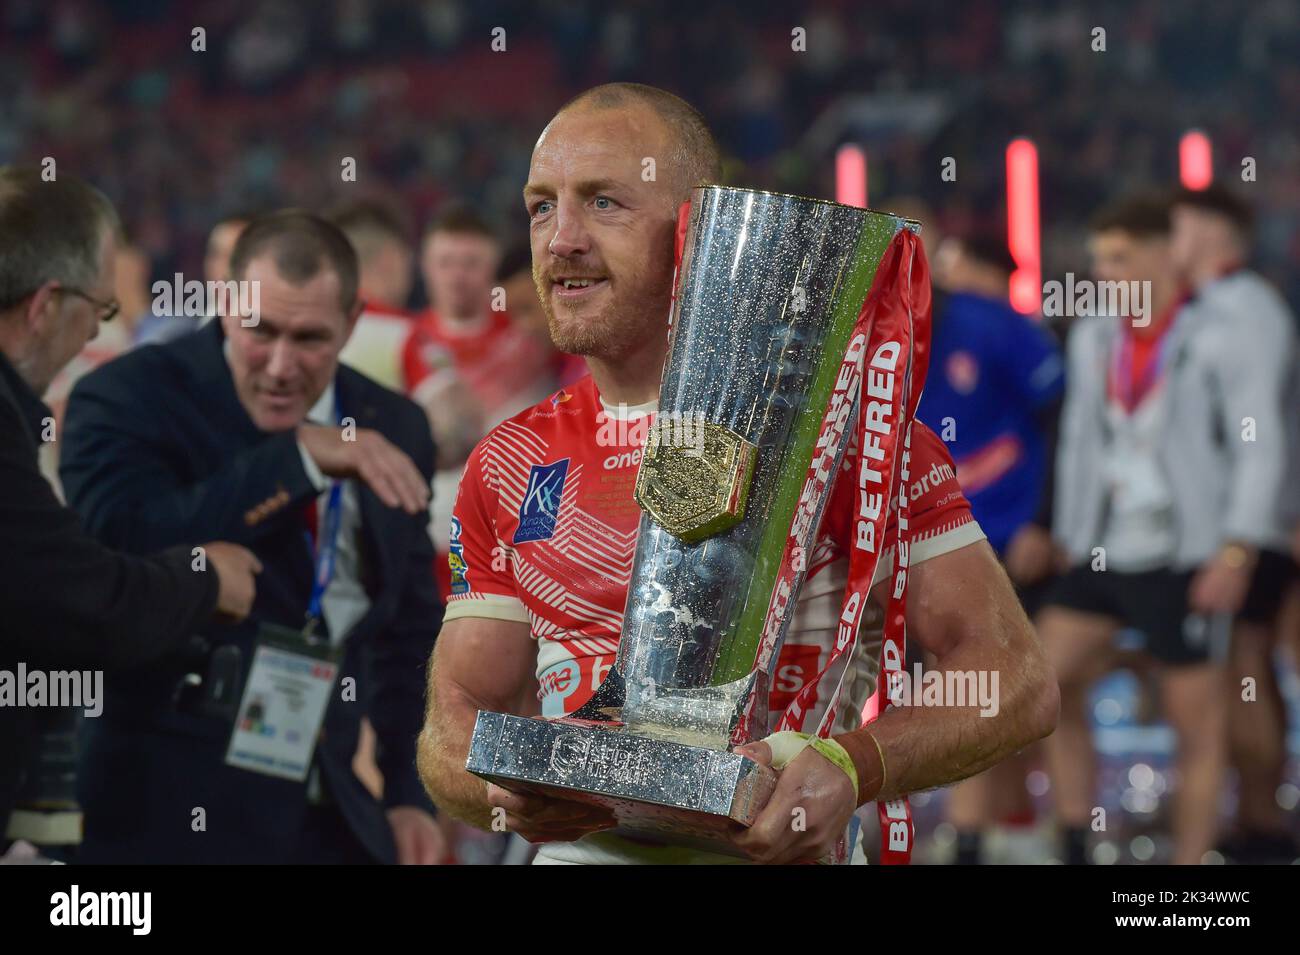 2022 Grand final, St Helens / Leeds Rhinos Manchester, Old Trafford, Royaume-Uni 18:00 coup d'envoi 24.09.2022 crédit : Craig Cresswell/Alay Live News Banque D'Images